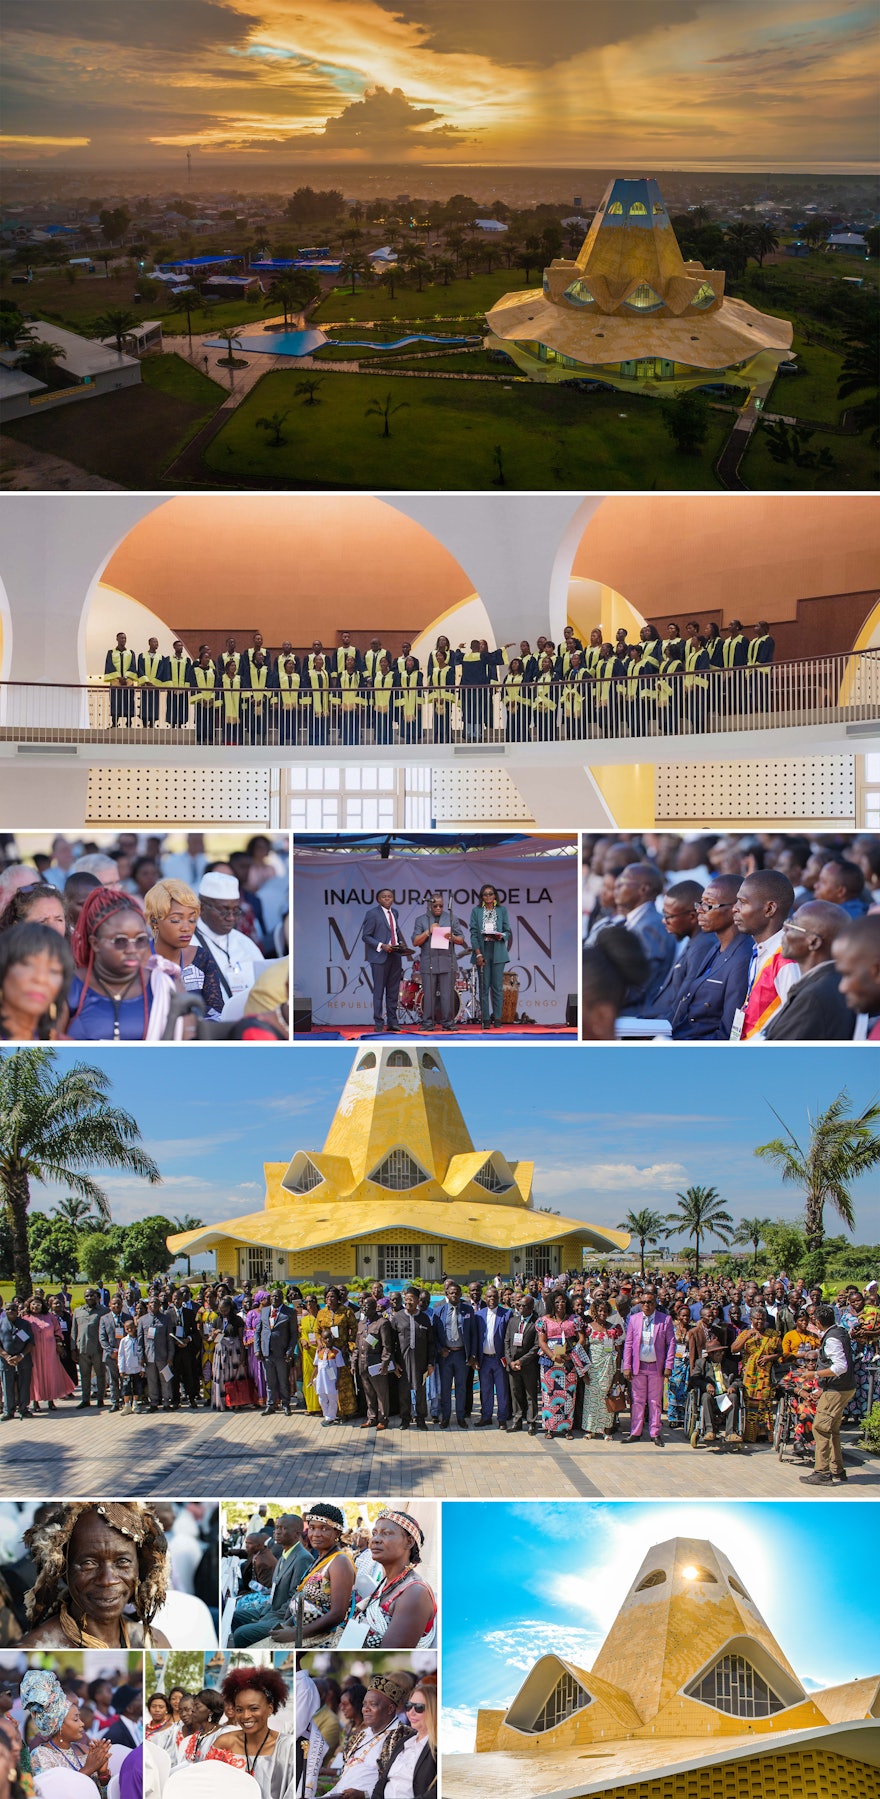 In the DRC, the first national Bahá’í House of Worship opened its doors and the Universal House of Justice also announced plans for three new Bahá’í Houses of Worship to be established—local temples in Kanchanpur, Nepal, and Mwinilunga, Zambia, along with a national temple in Canada.